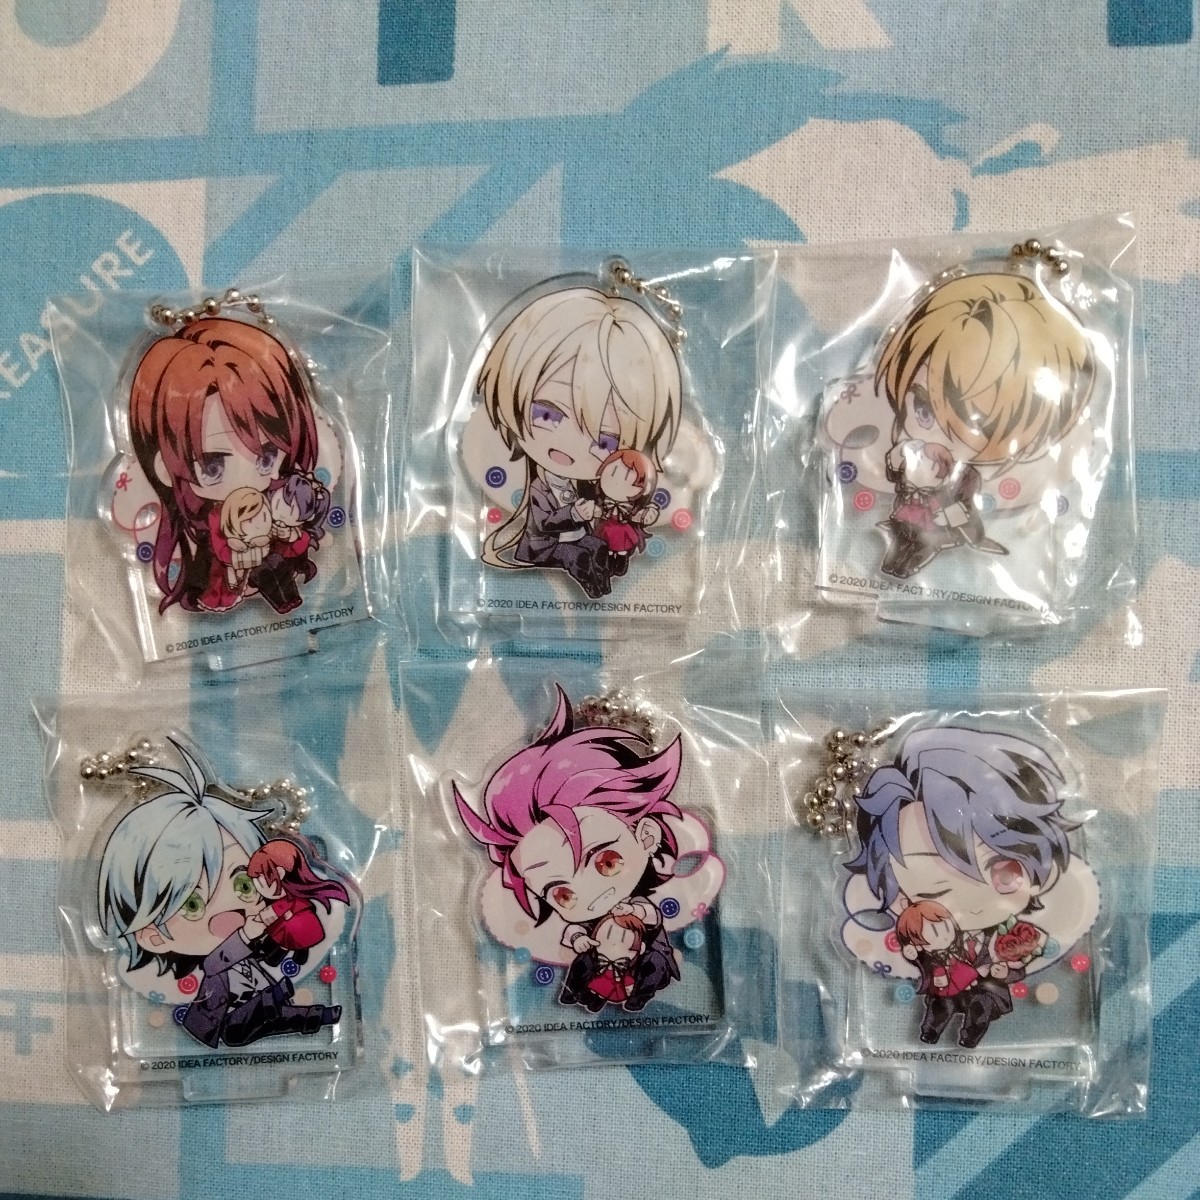 Switch VARIABLE BARRICADE NS special Stella set privilege ....... Cara acrylic fiber stand key chain 6 piece set unused goods 